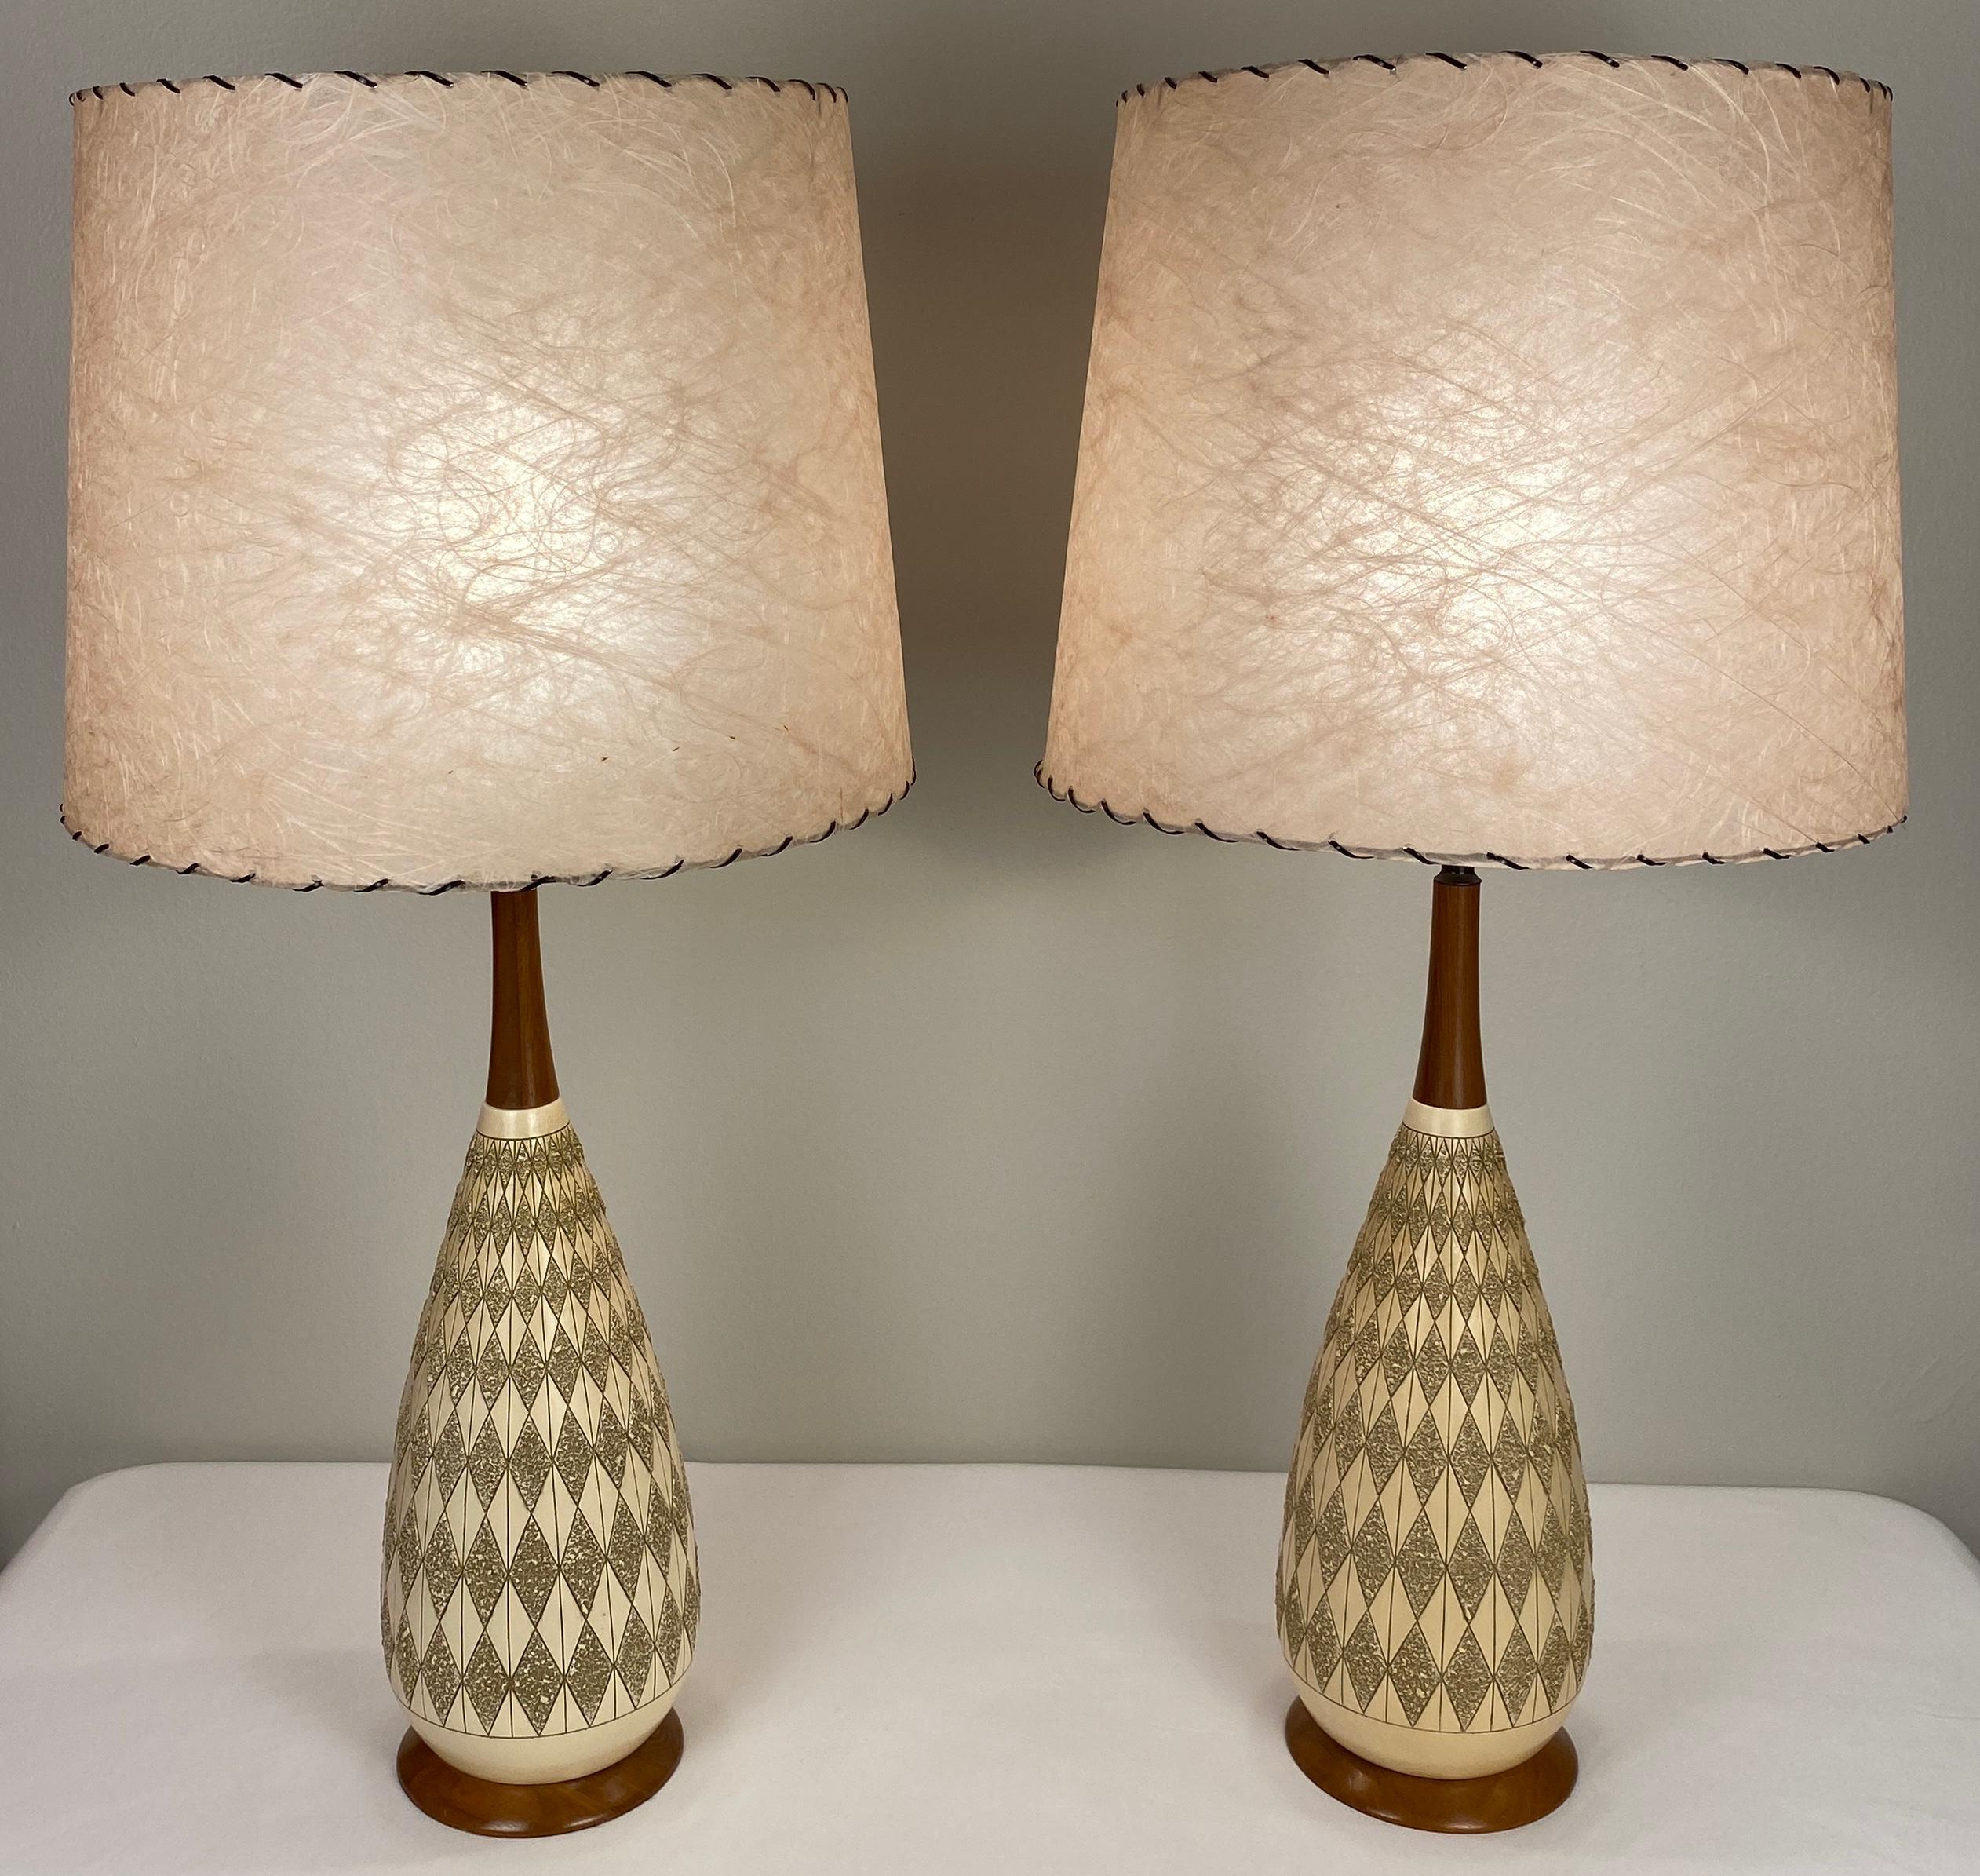 Pair of fine quality wooden mid-century table lamps with resin shades. 

These table lamps boasts curves that bring fluid movement into an otherwise straightforward design. It creates an almost optical illusion that recalibrates expectations of what